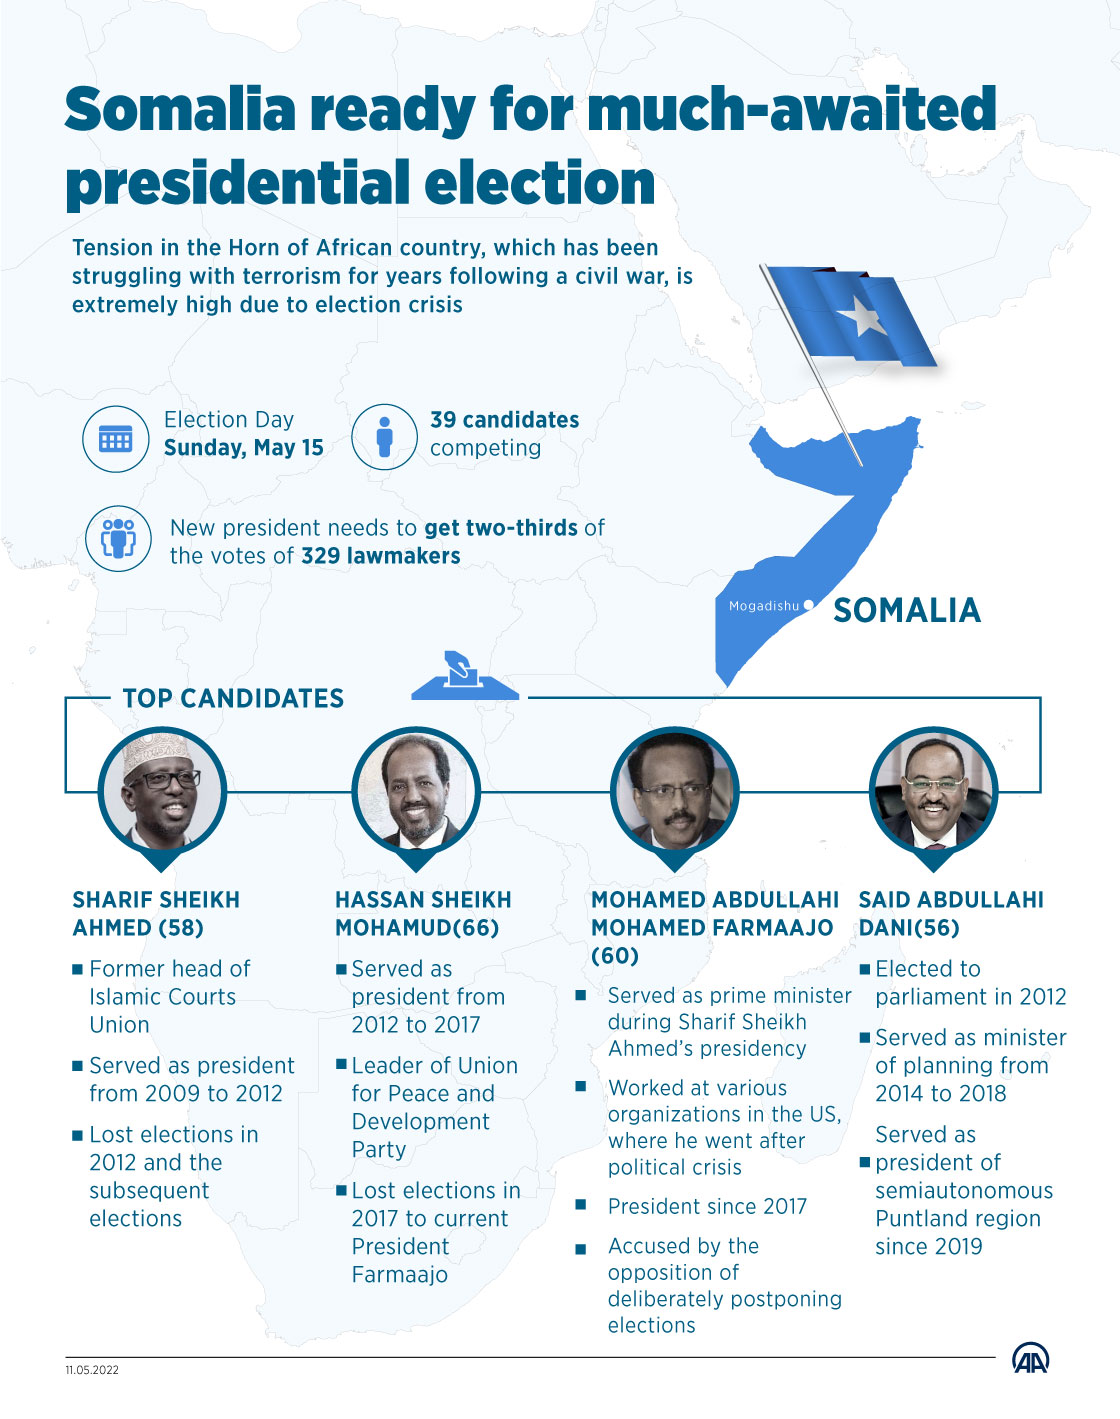 Record number of candidates cleared to run for Somali presidency